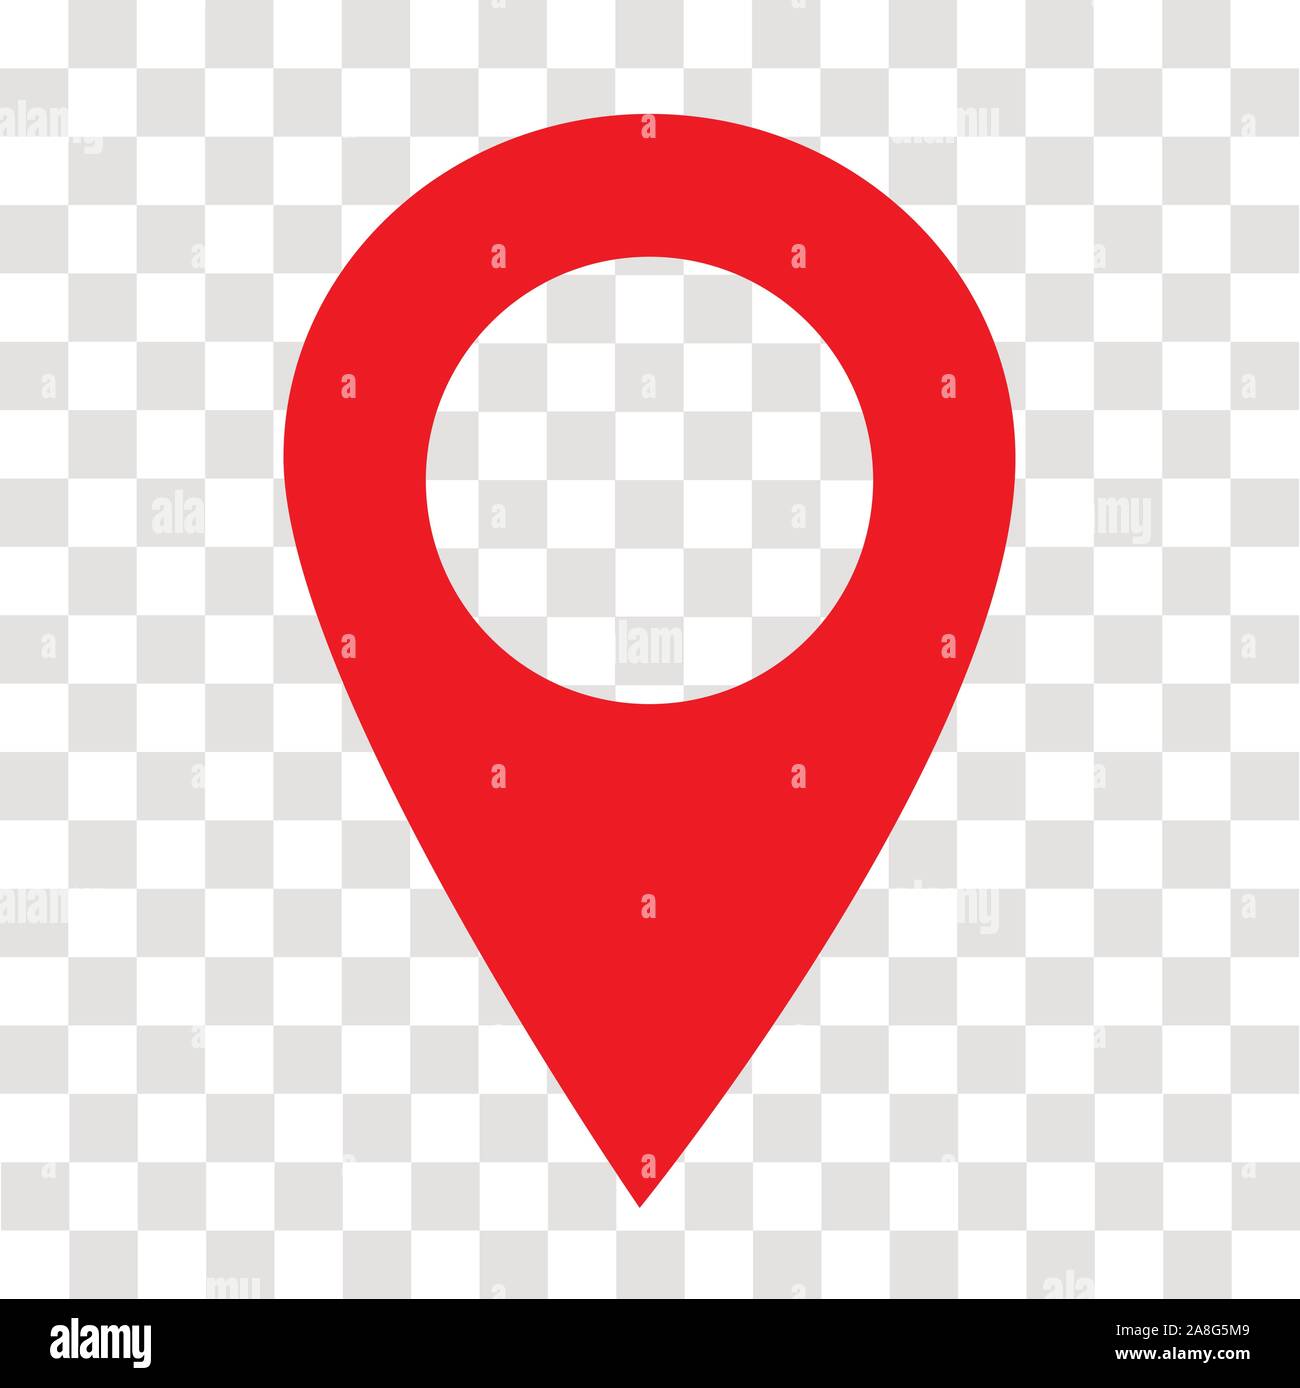 Location Pin Icon On Transparent Location Pin Sign Flat Style Red Location Pin Symbol Map Pointer Symbol Map Pin Sign Stock Vector Image Art Alamy